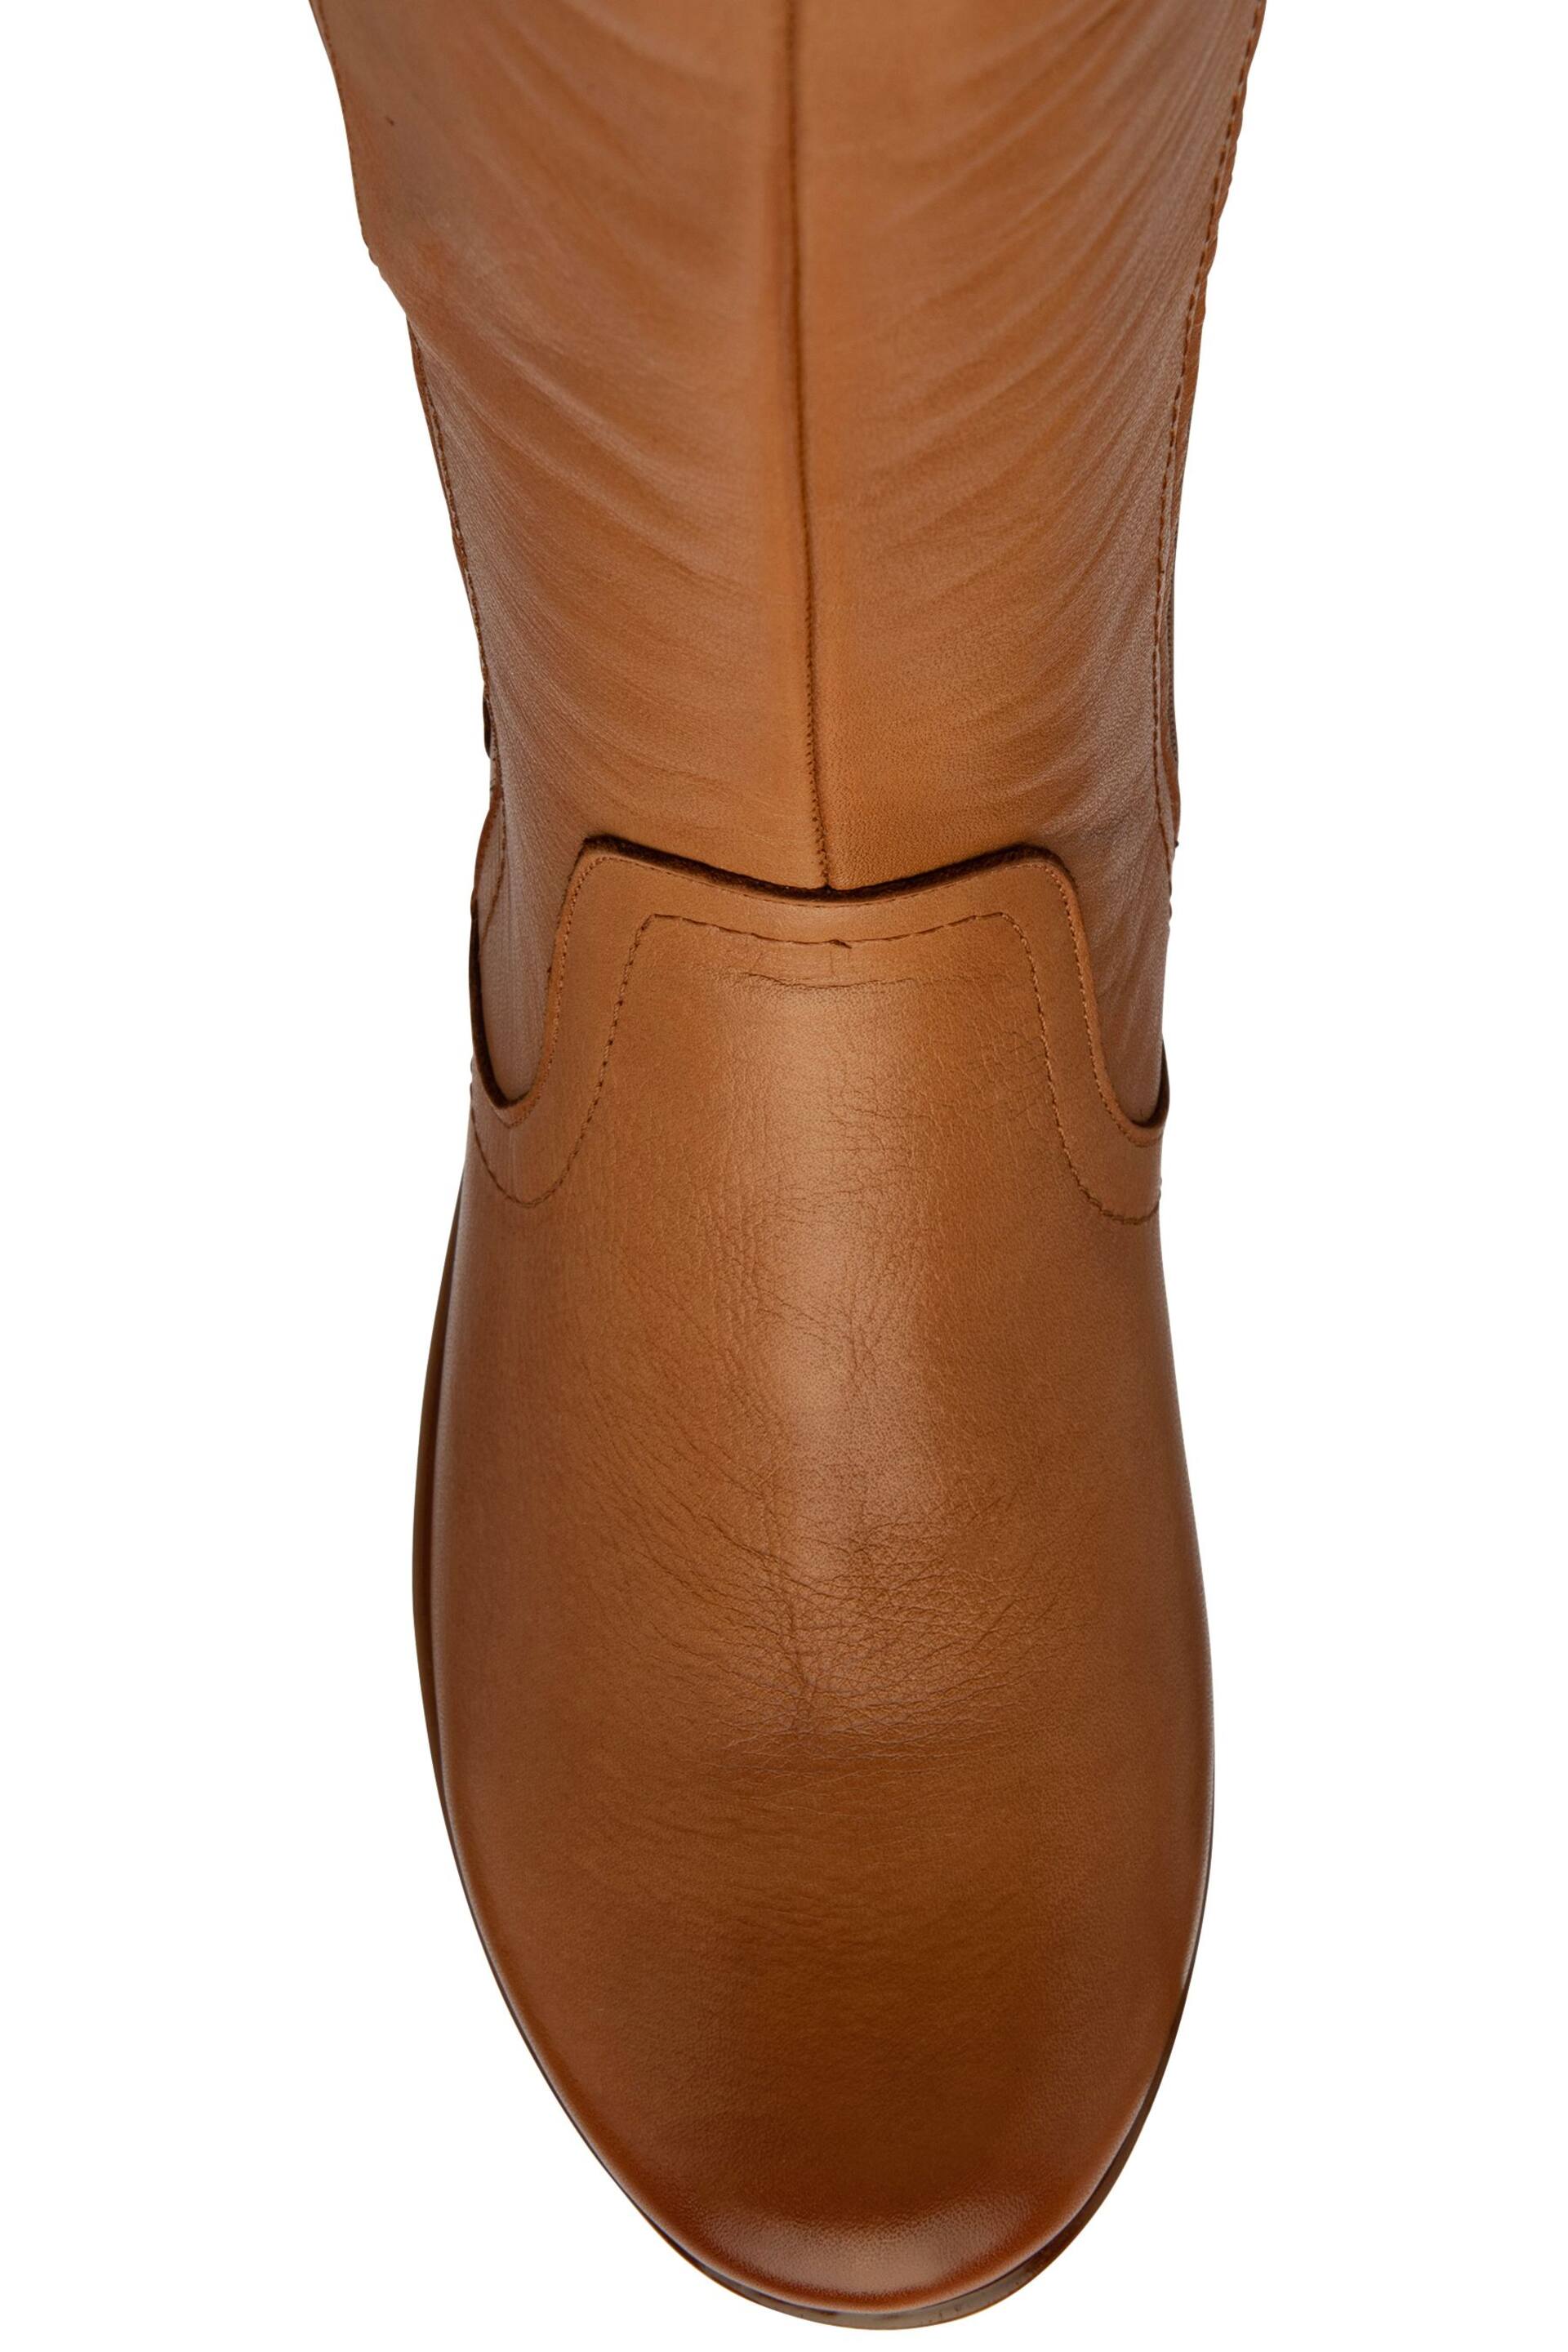 Lotus Brown Leather Wedge Knee-High Boots - Image 4 of 4